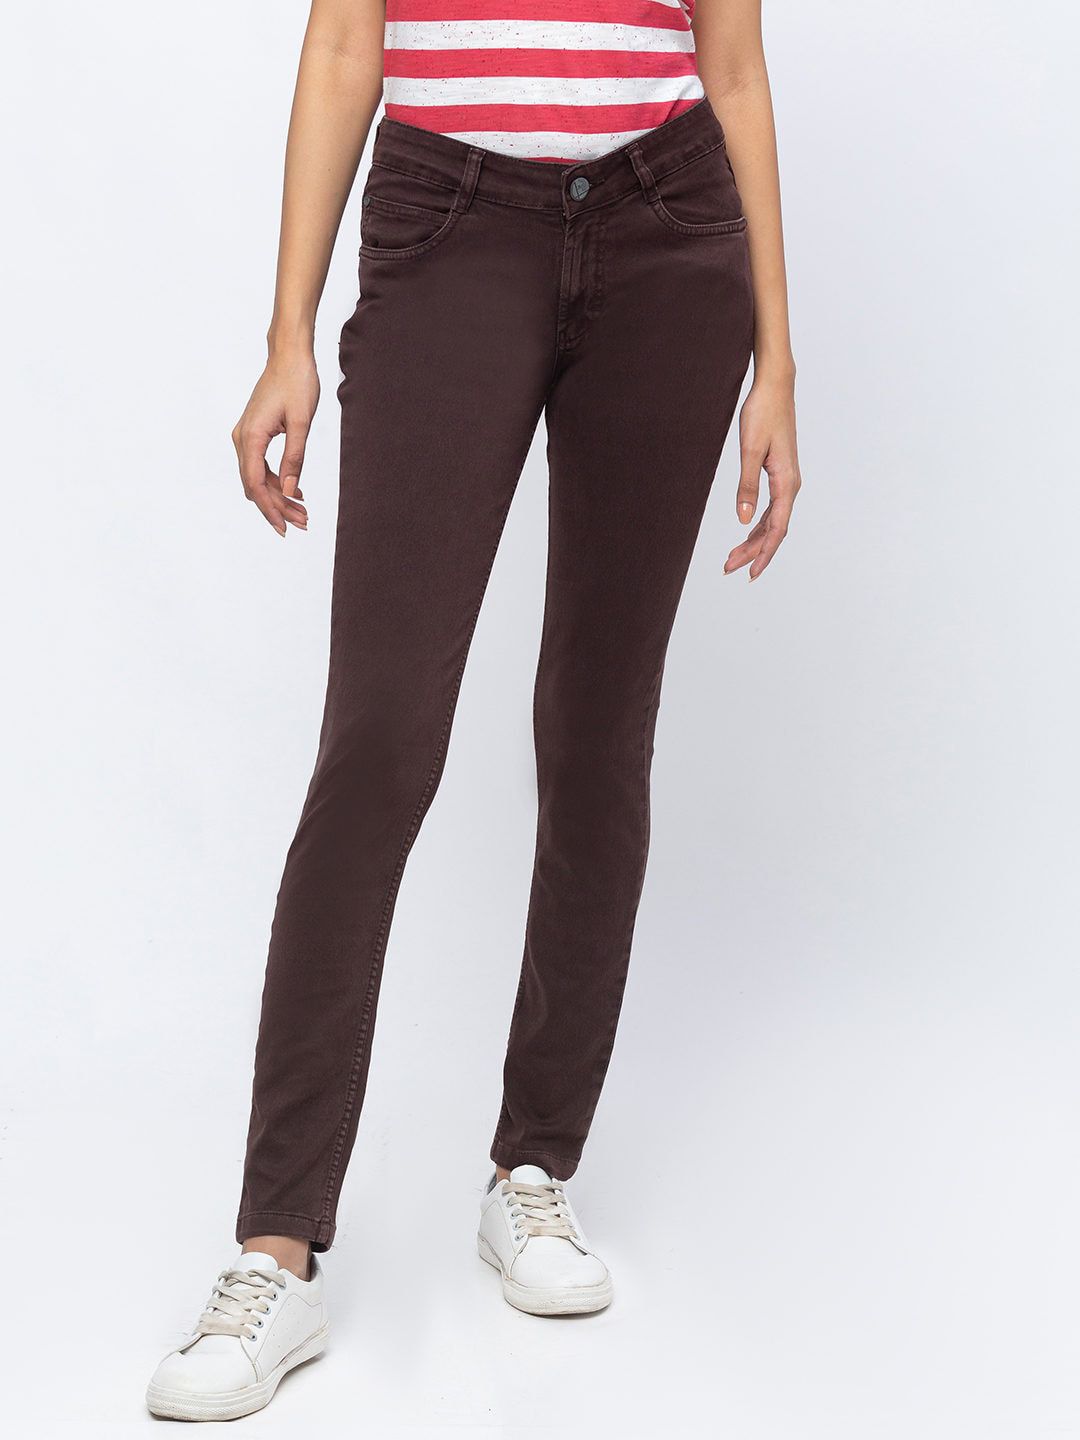 ZOLA Women Brown Coloured Slim Fit Stretchable Jeans Price in India